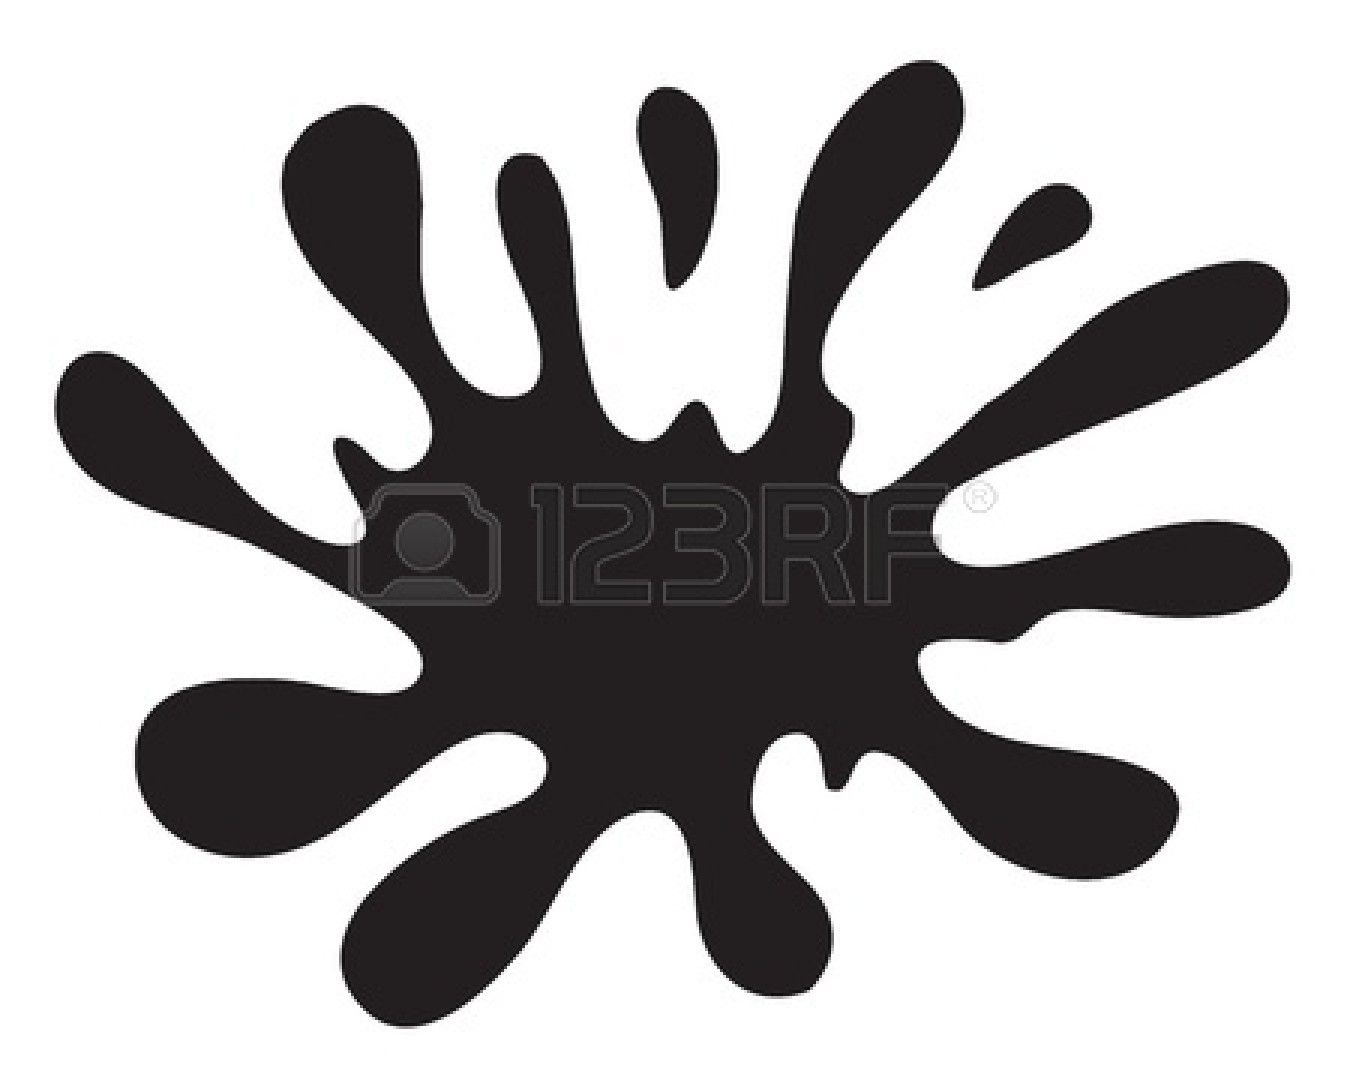 free clipart in black and white - photo #30